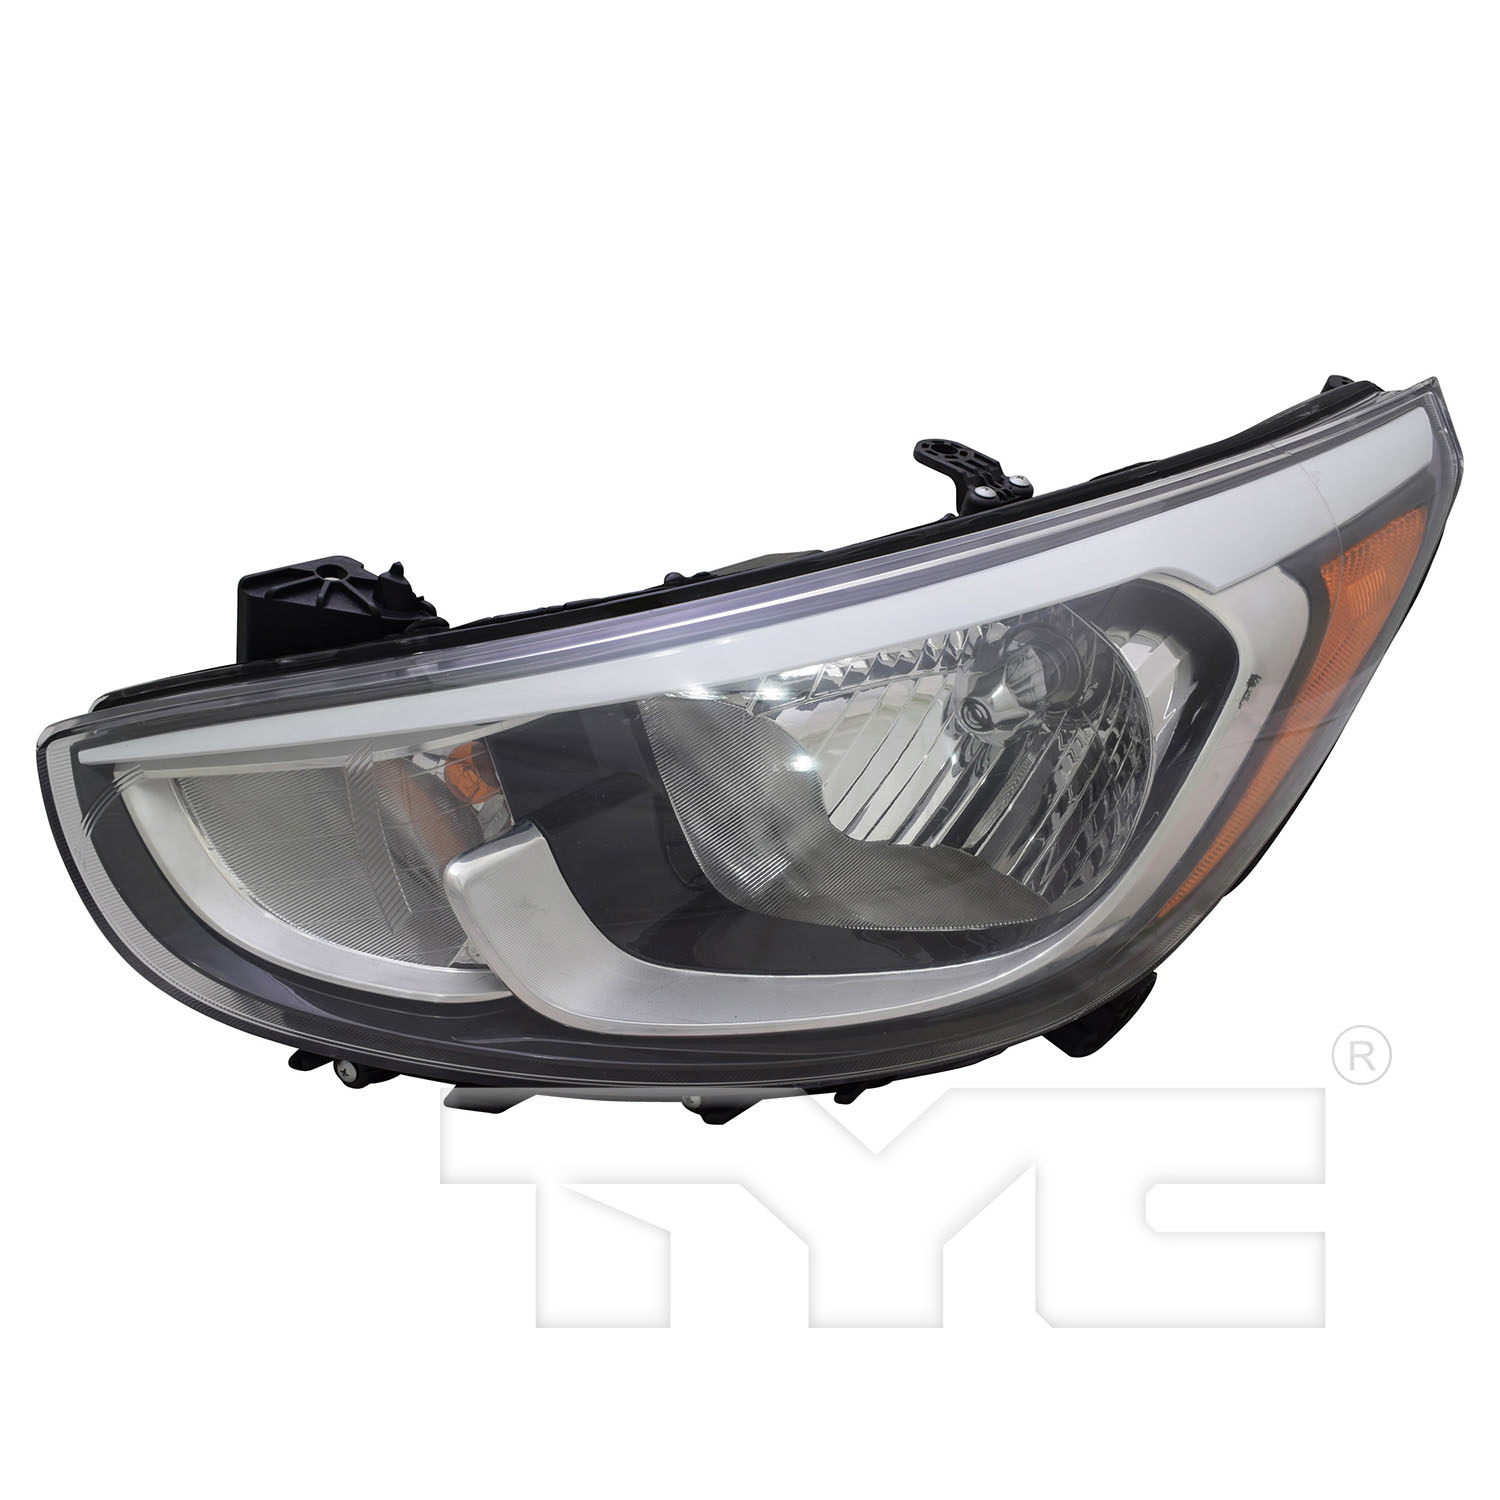 Aftermarket HEADLIGHTS for HYUNDAI - ACCENT, ACCENT,15-17,LT Headlamp assy composite